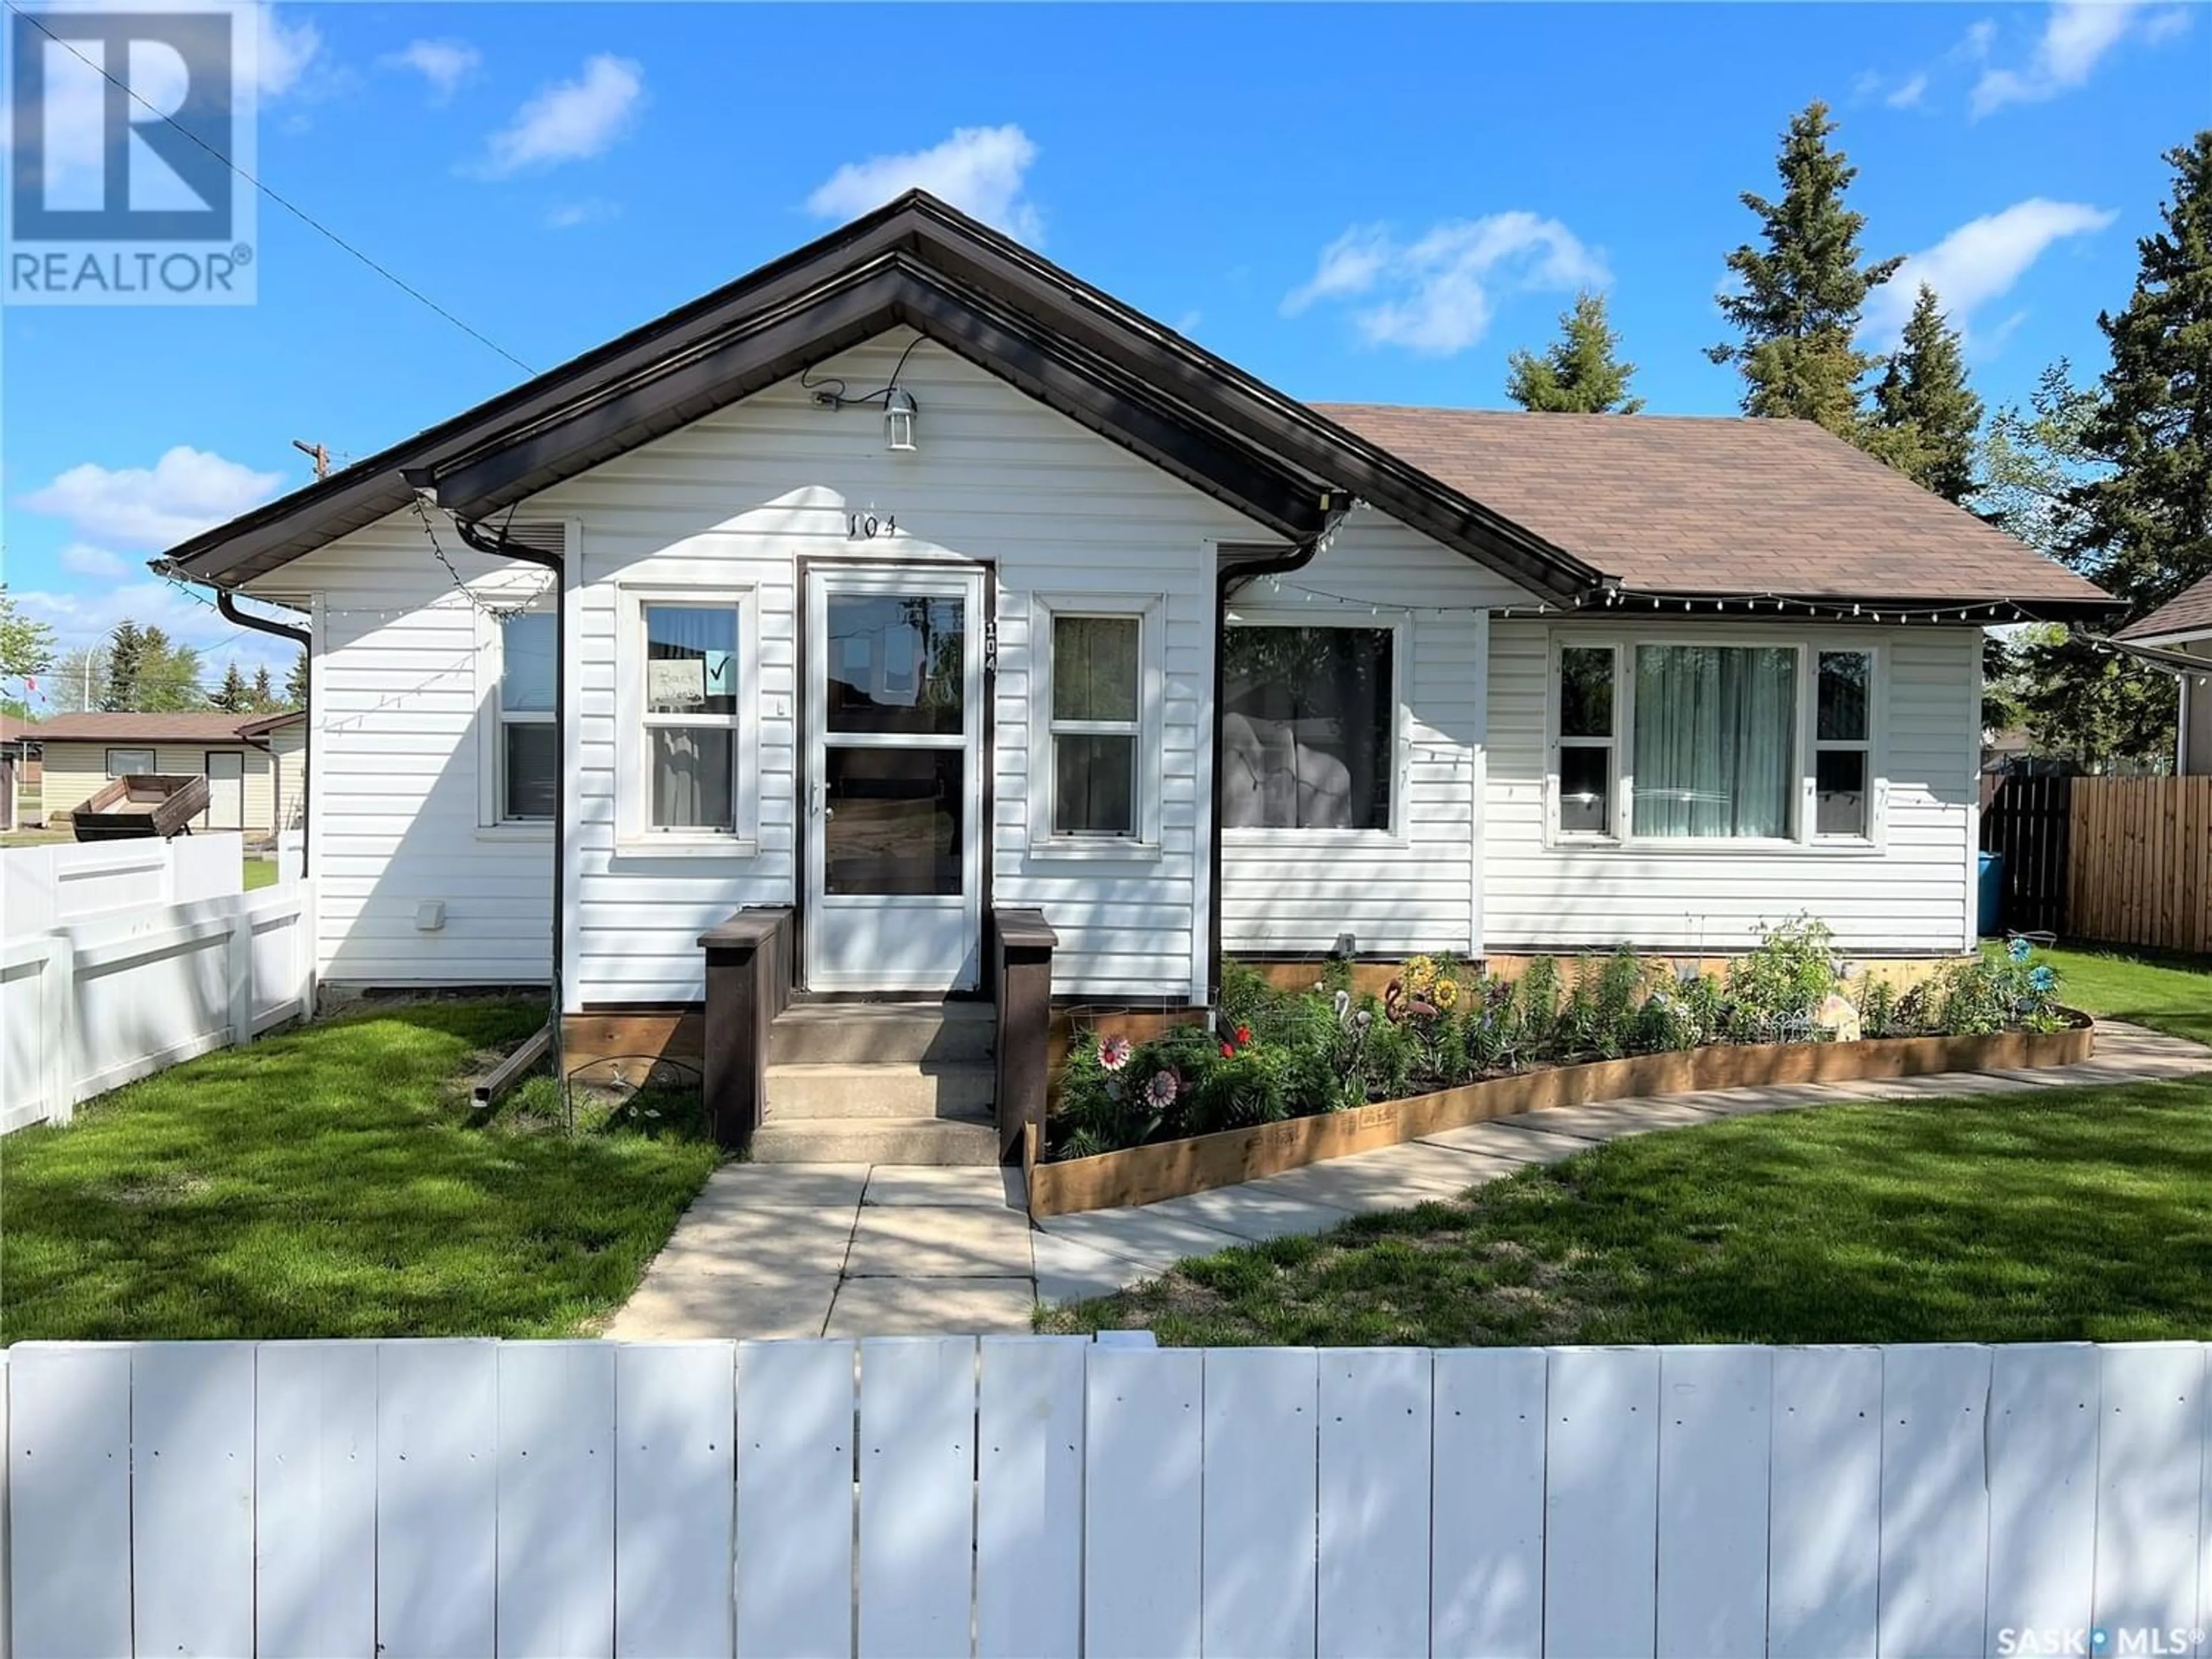 Home with vinyl exterior material for 104 2nd STREET E, Meadow Lake Saskatchewan S9X1G4